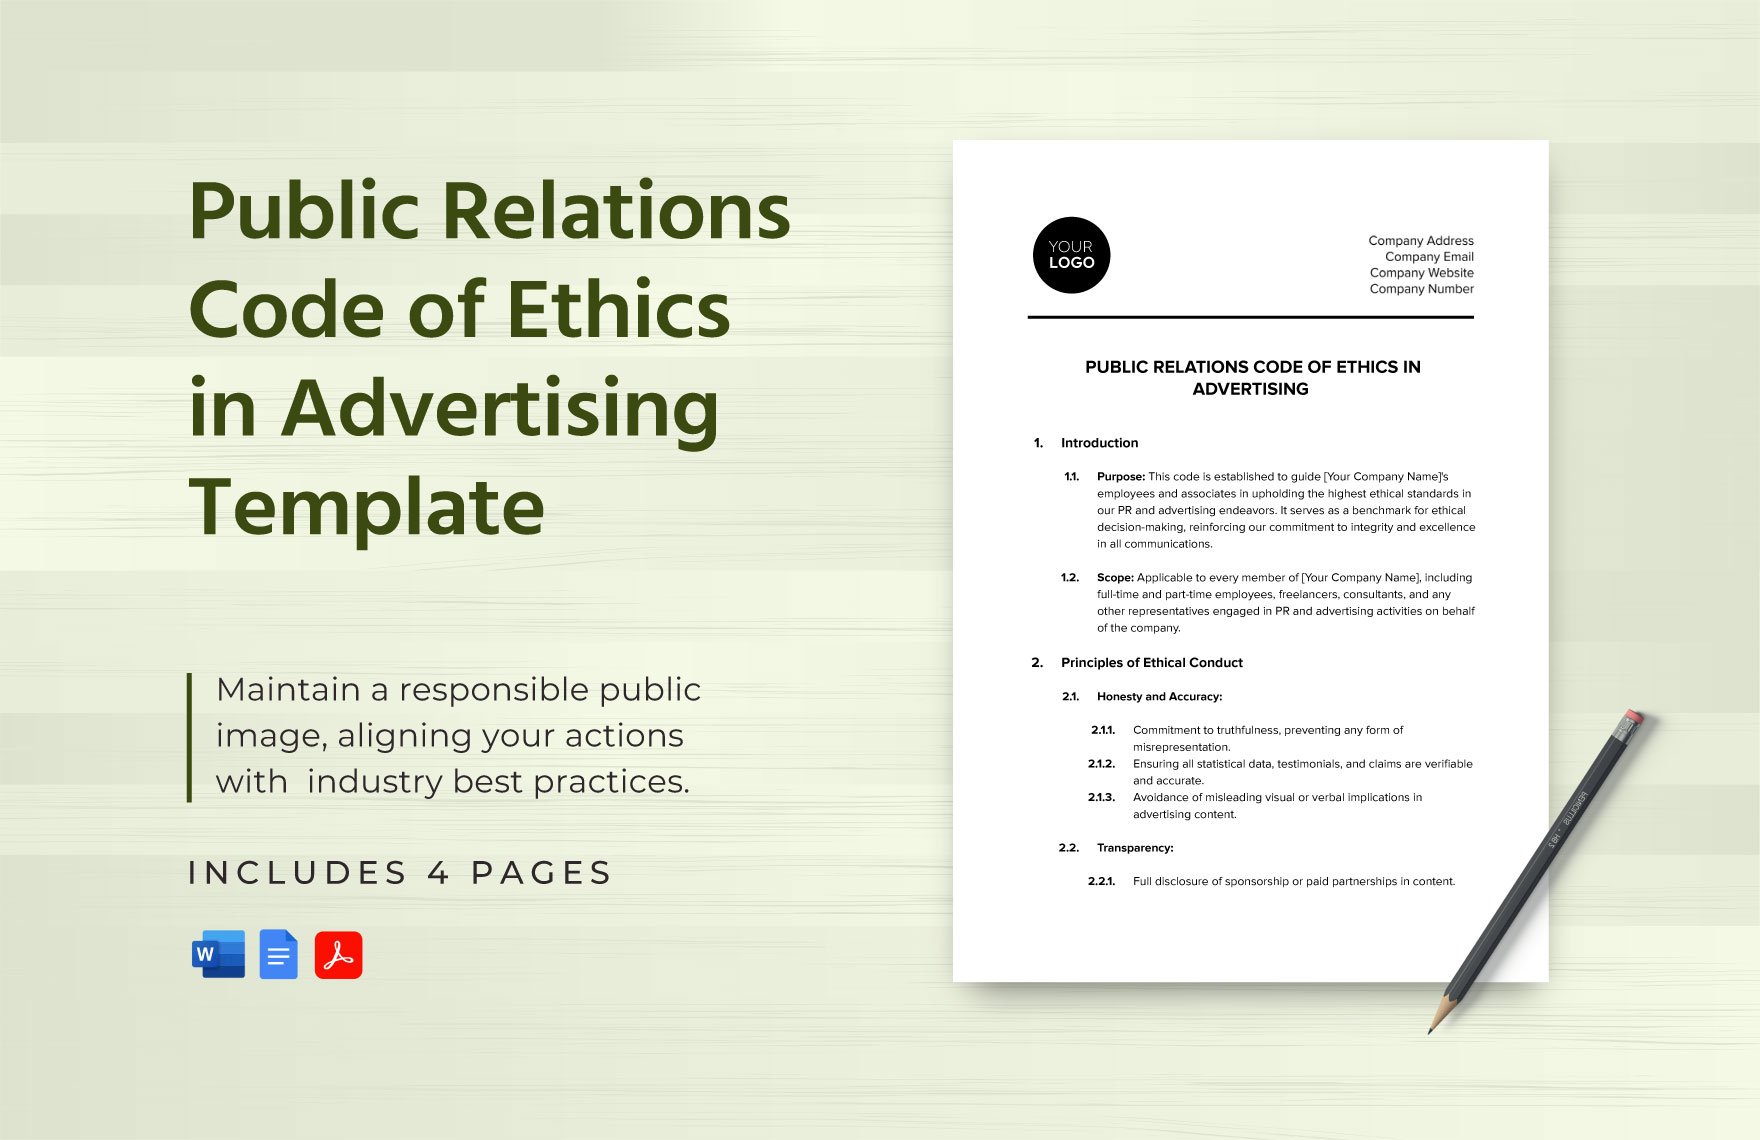 Public Relations Code of Ethics in Advertising Template